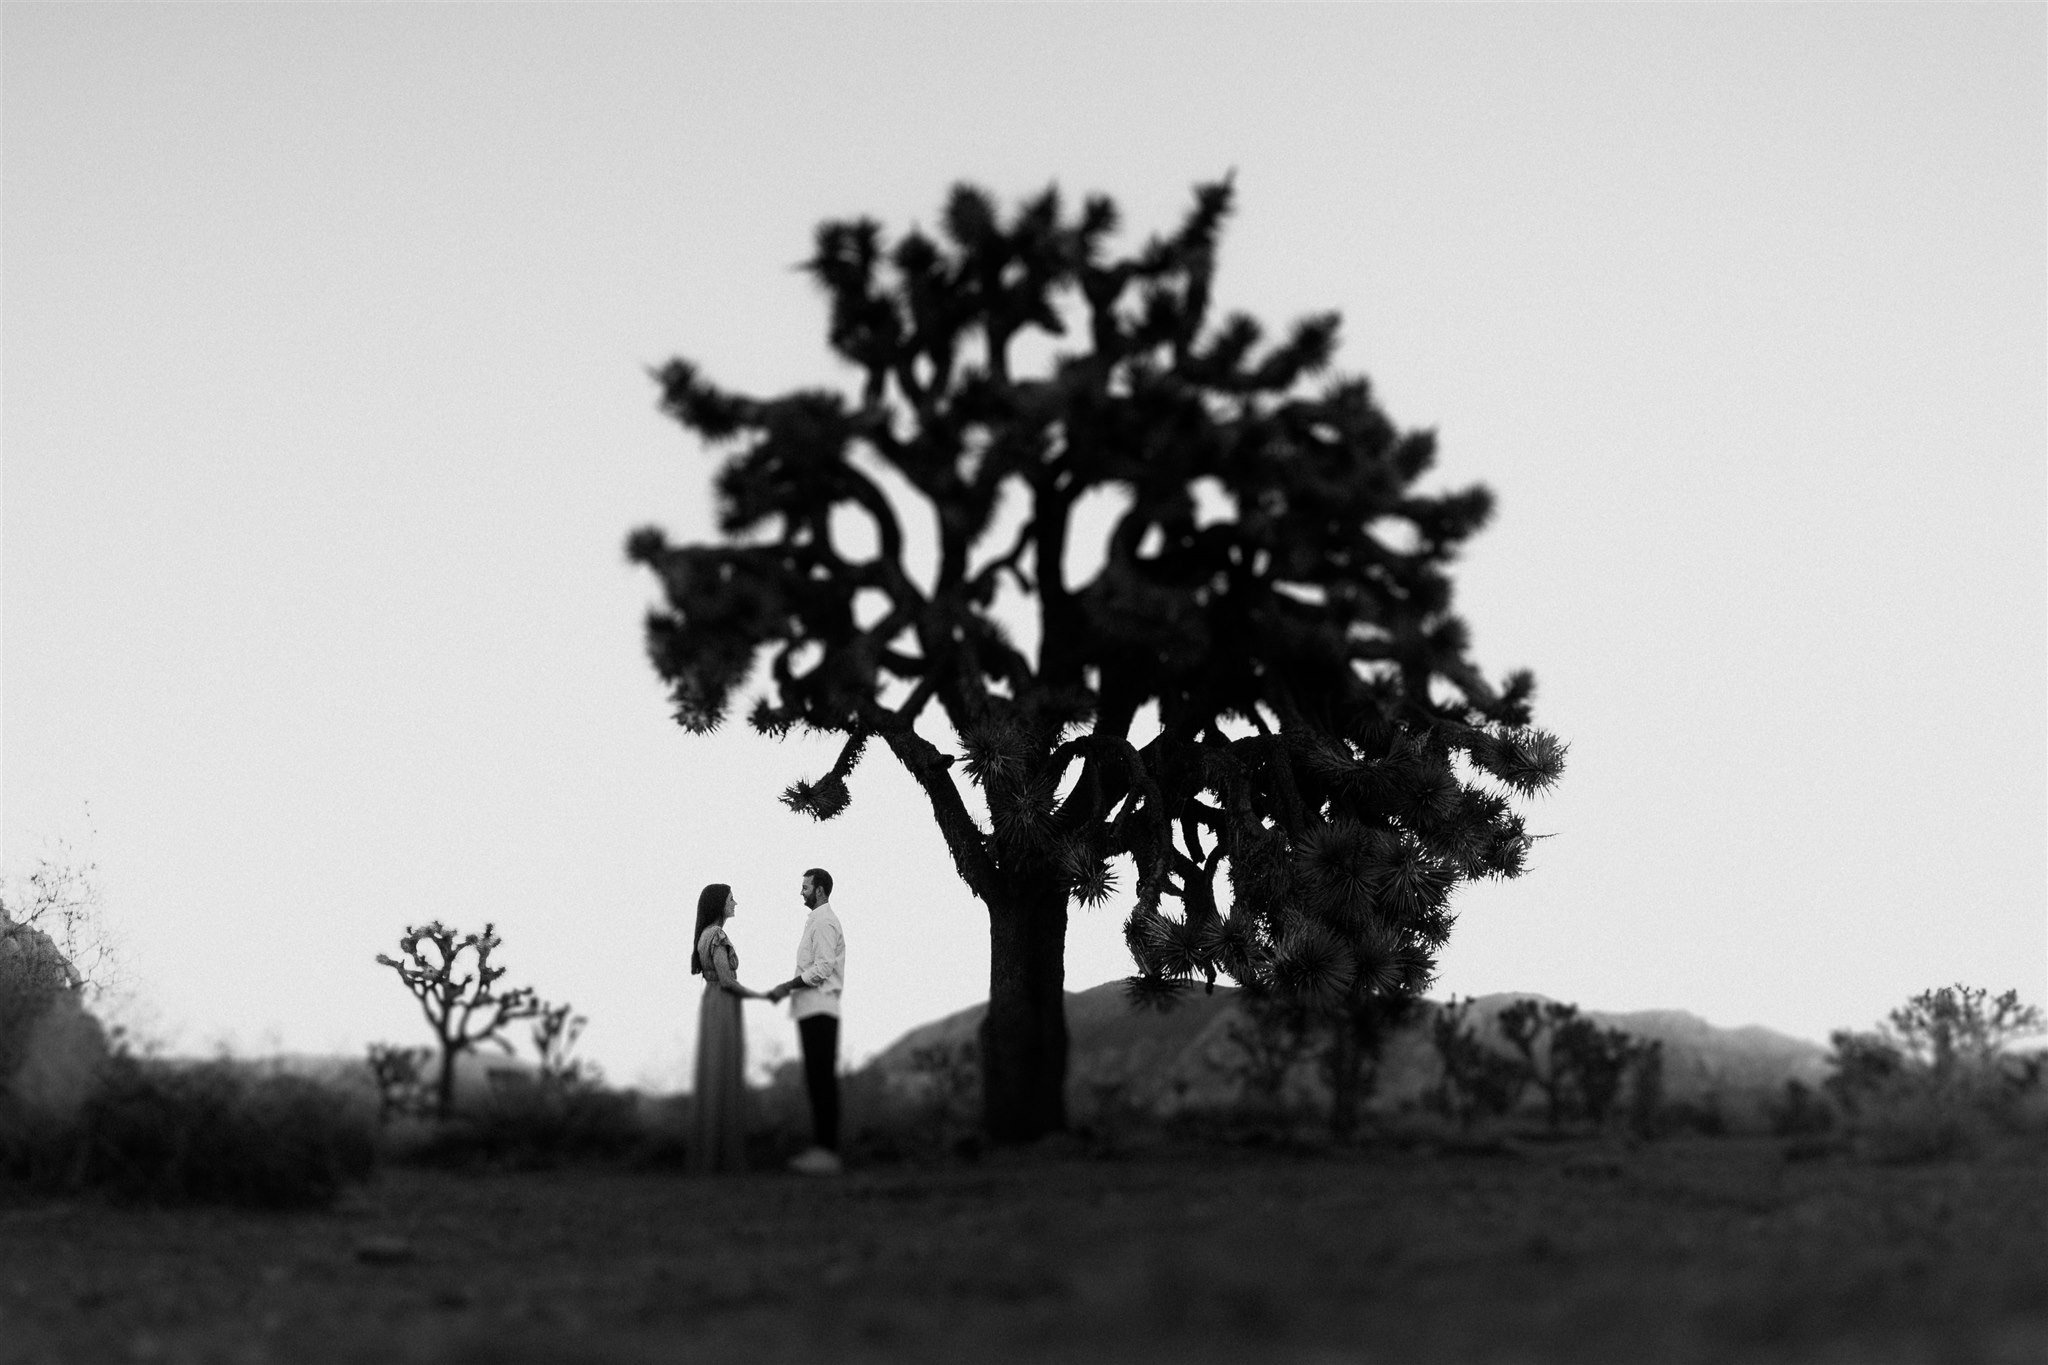 Joshua Tree Couples Session Surprise Proposal - Will Khoury Photography_11.jpg